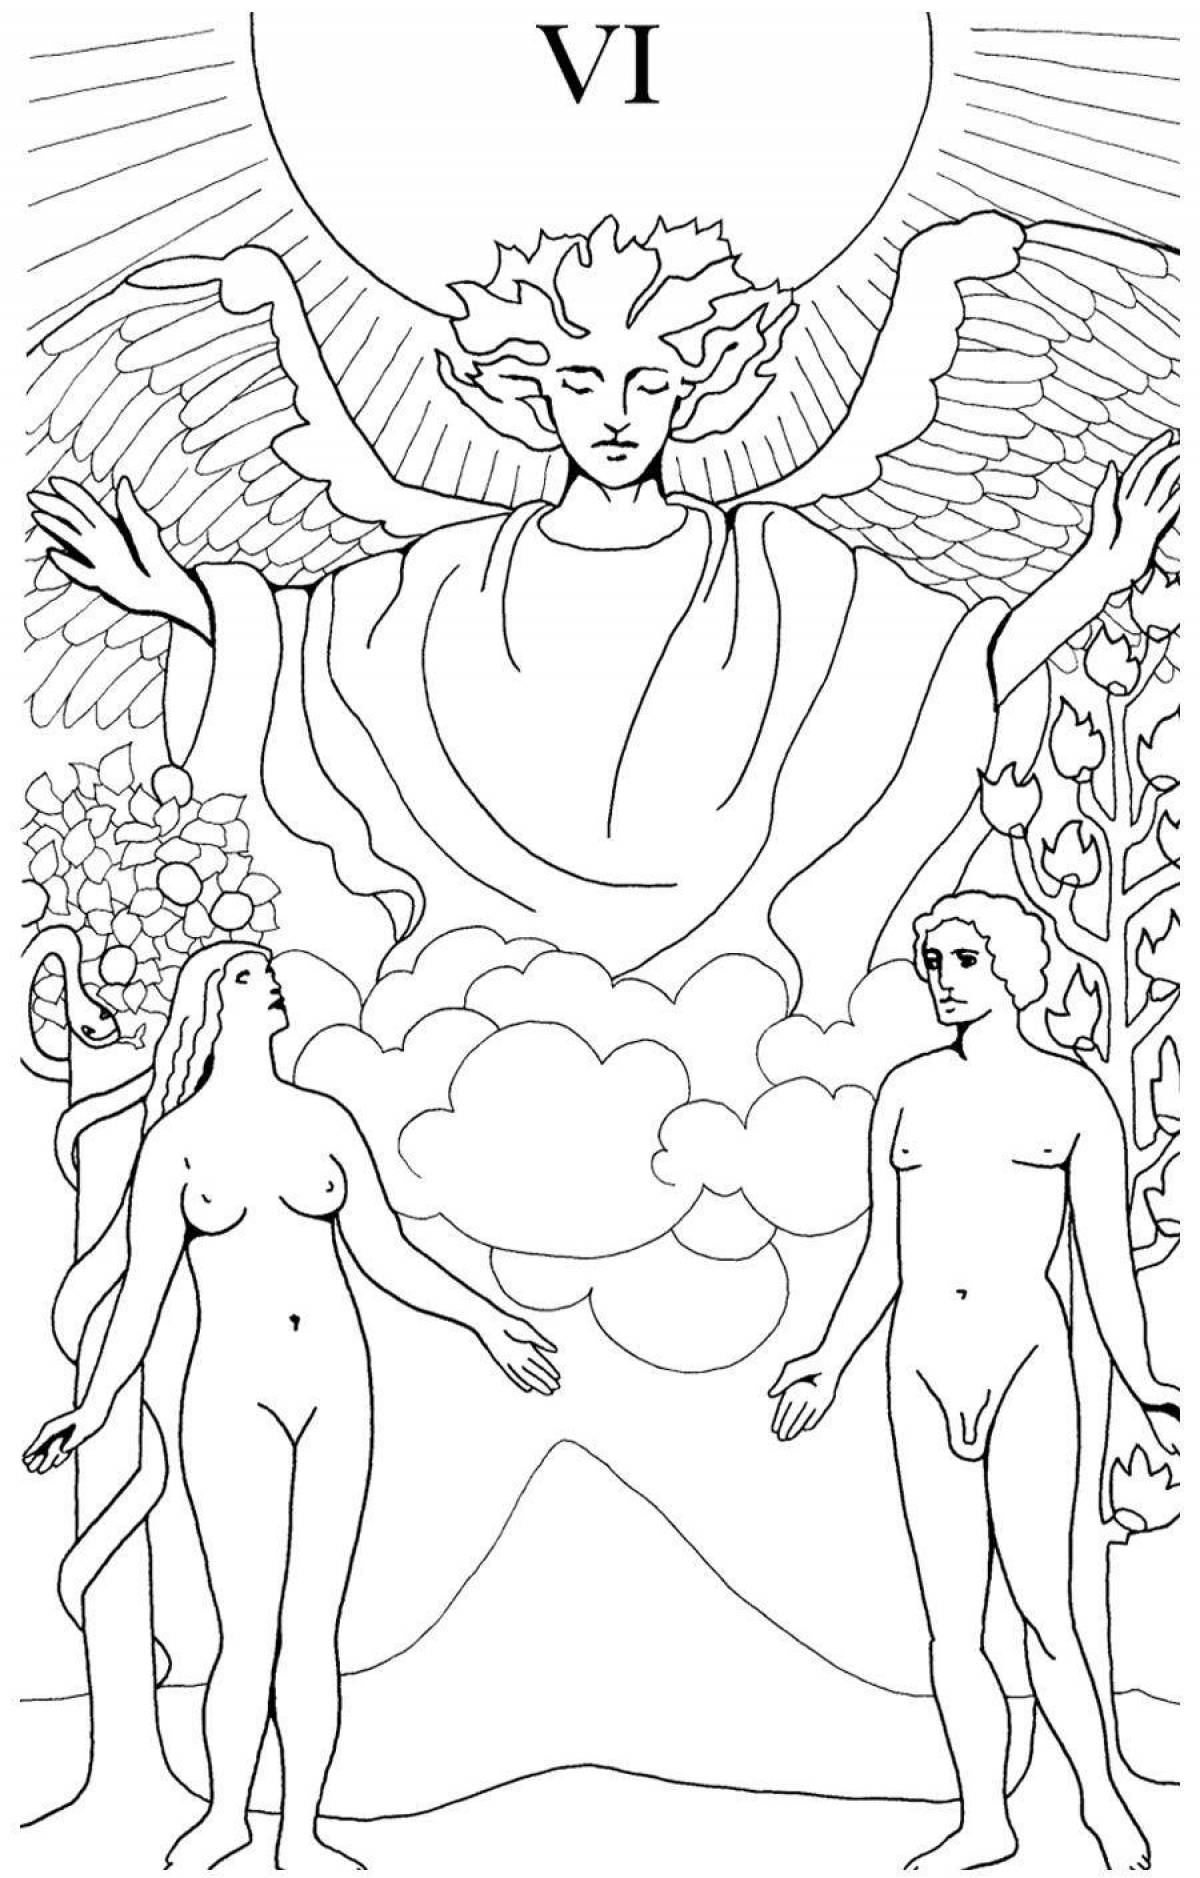 Charming tarot coloring pages